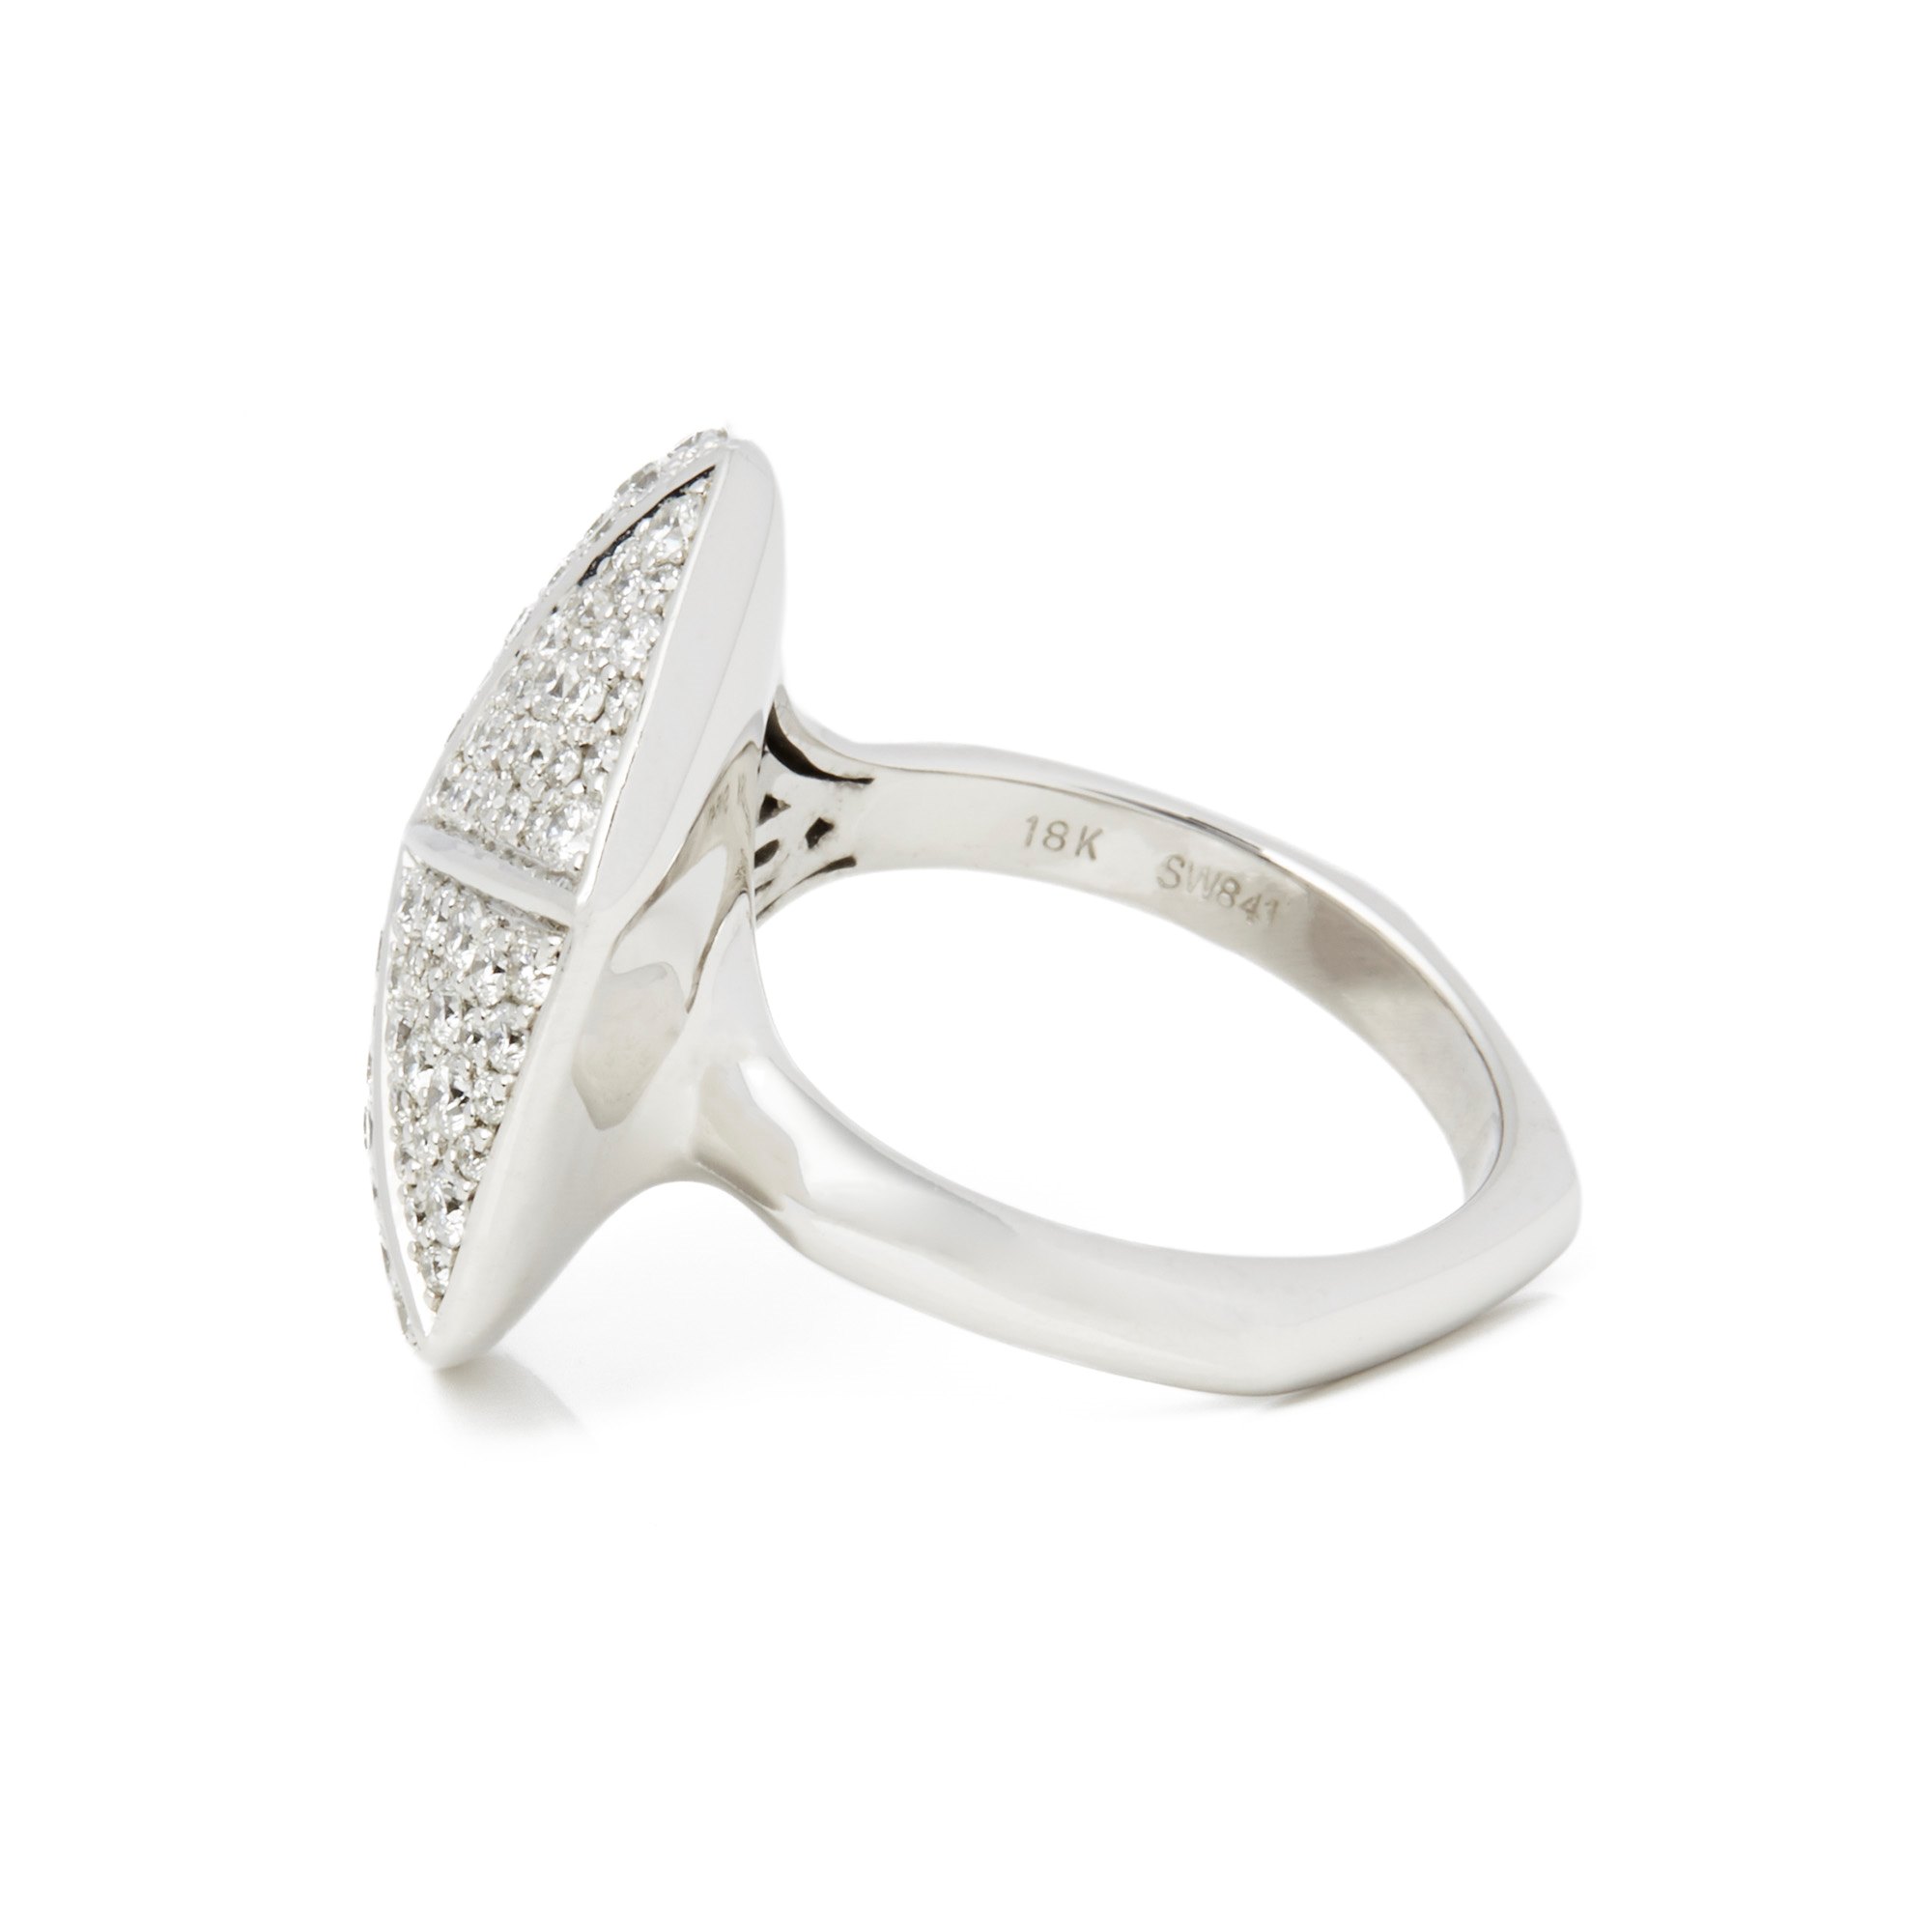 Stephen Webster Deco Pave Diamond RIng